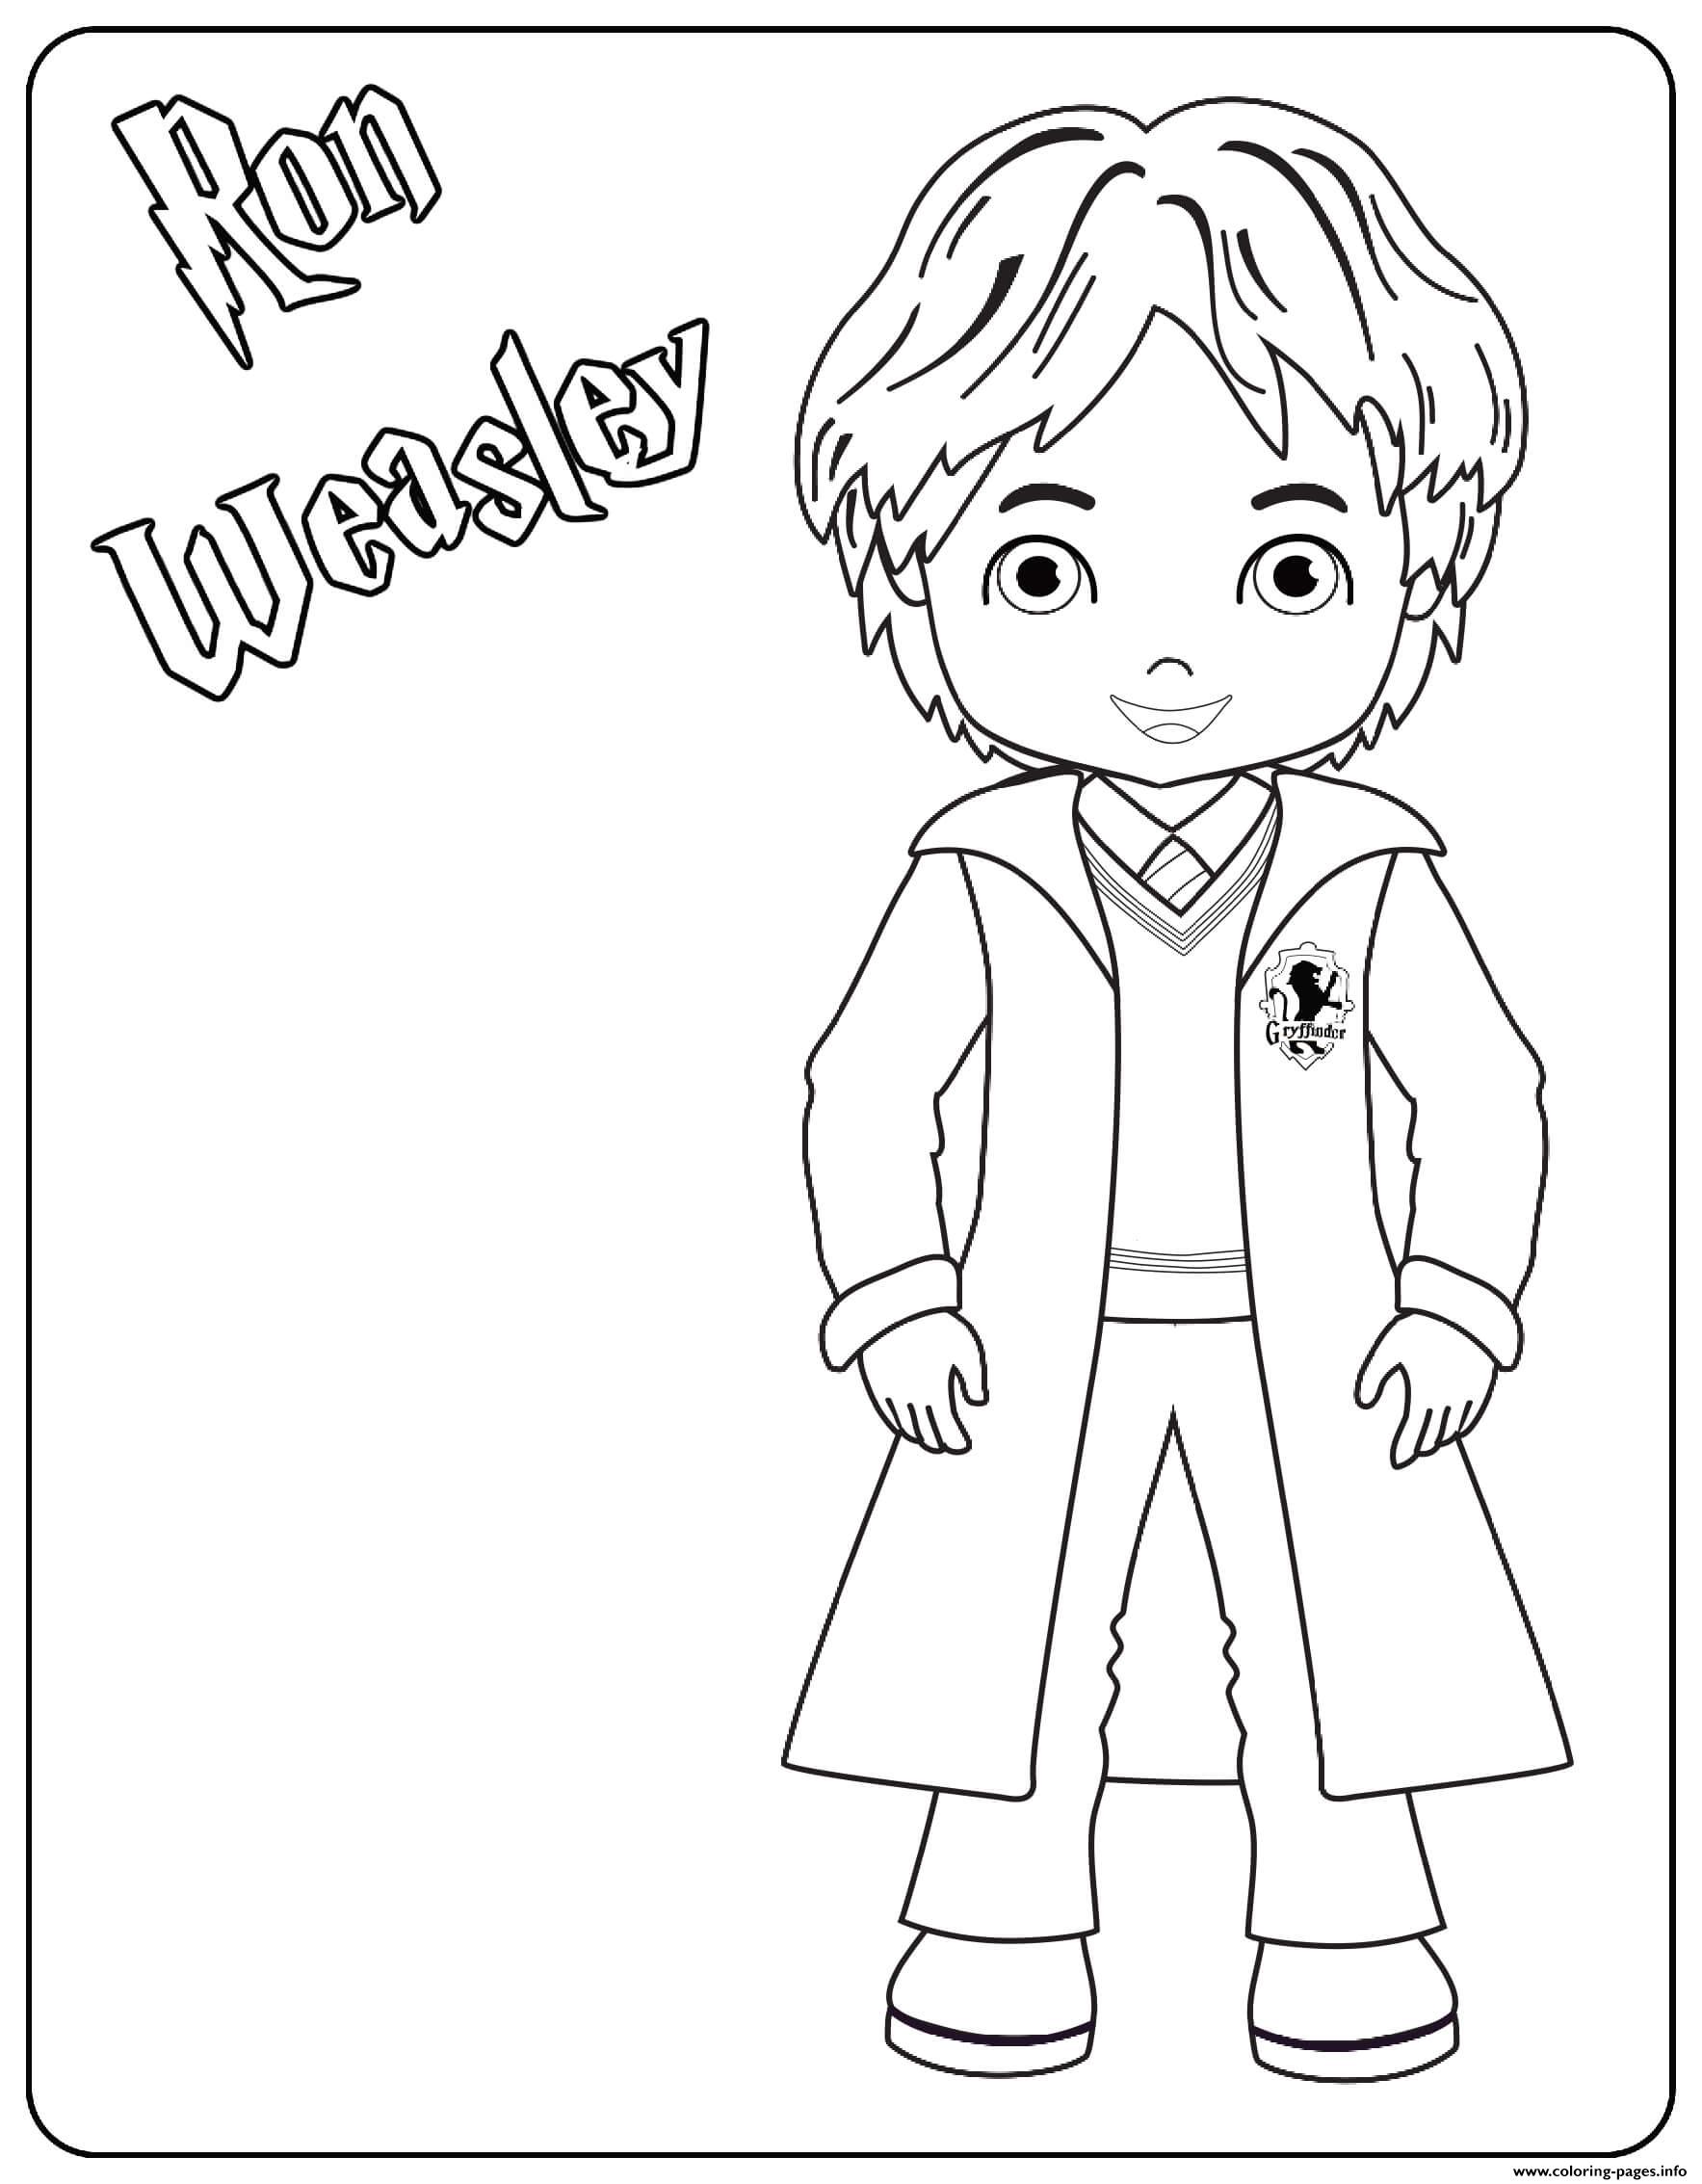 Ron Weasley coloring